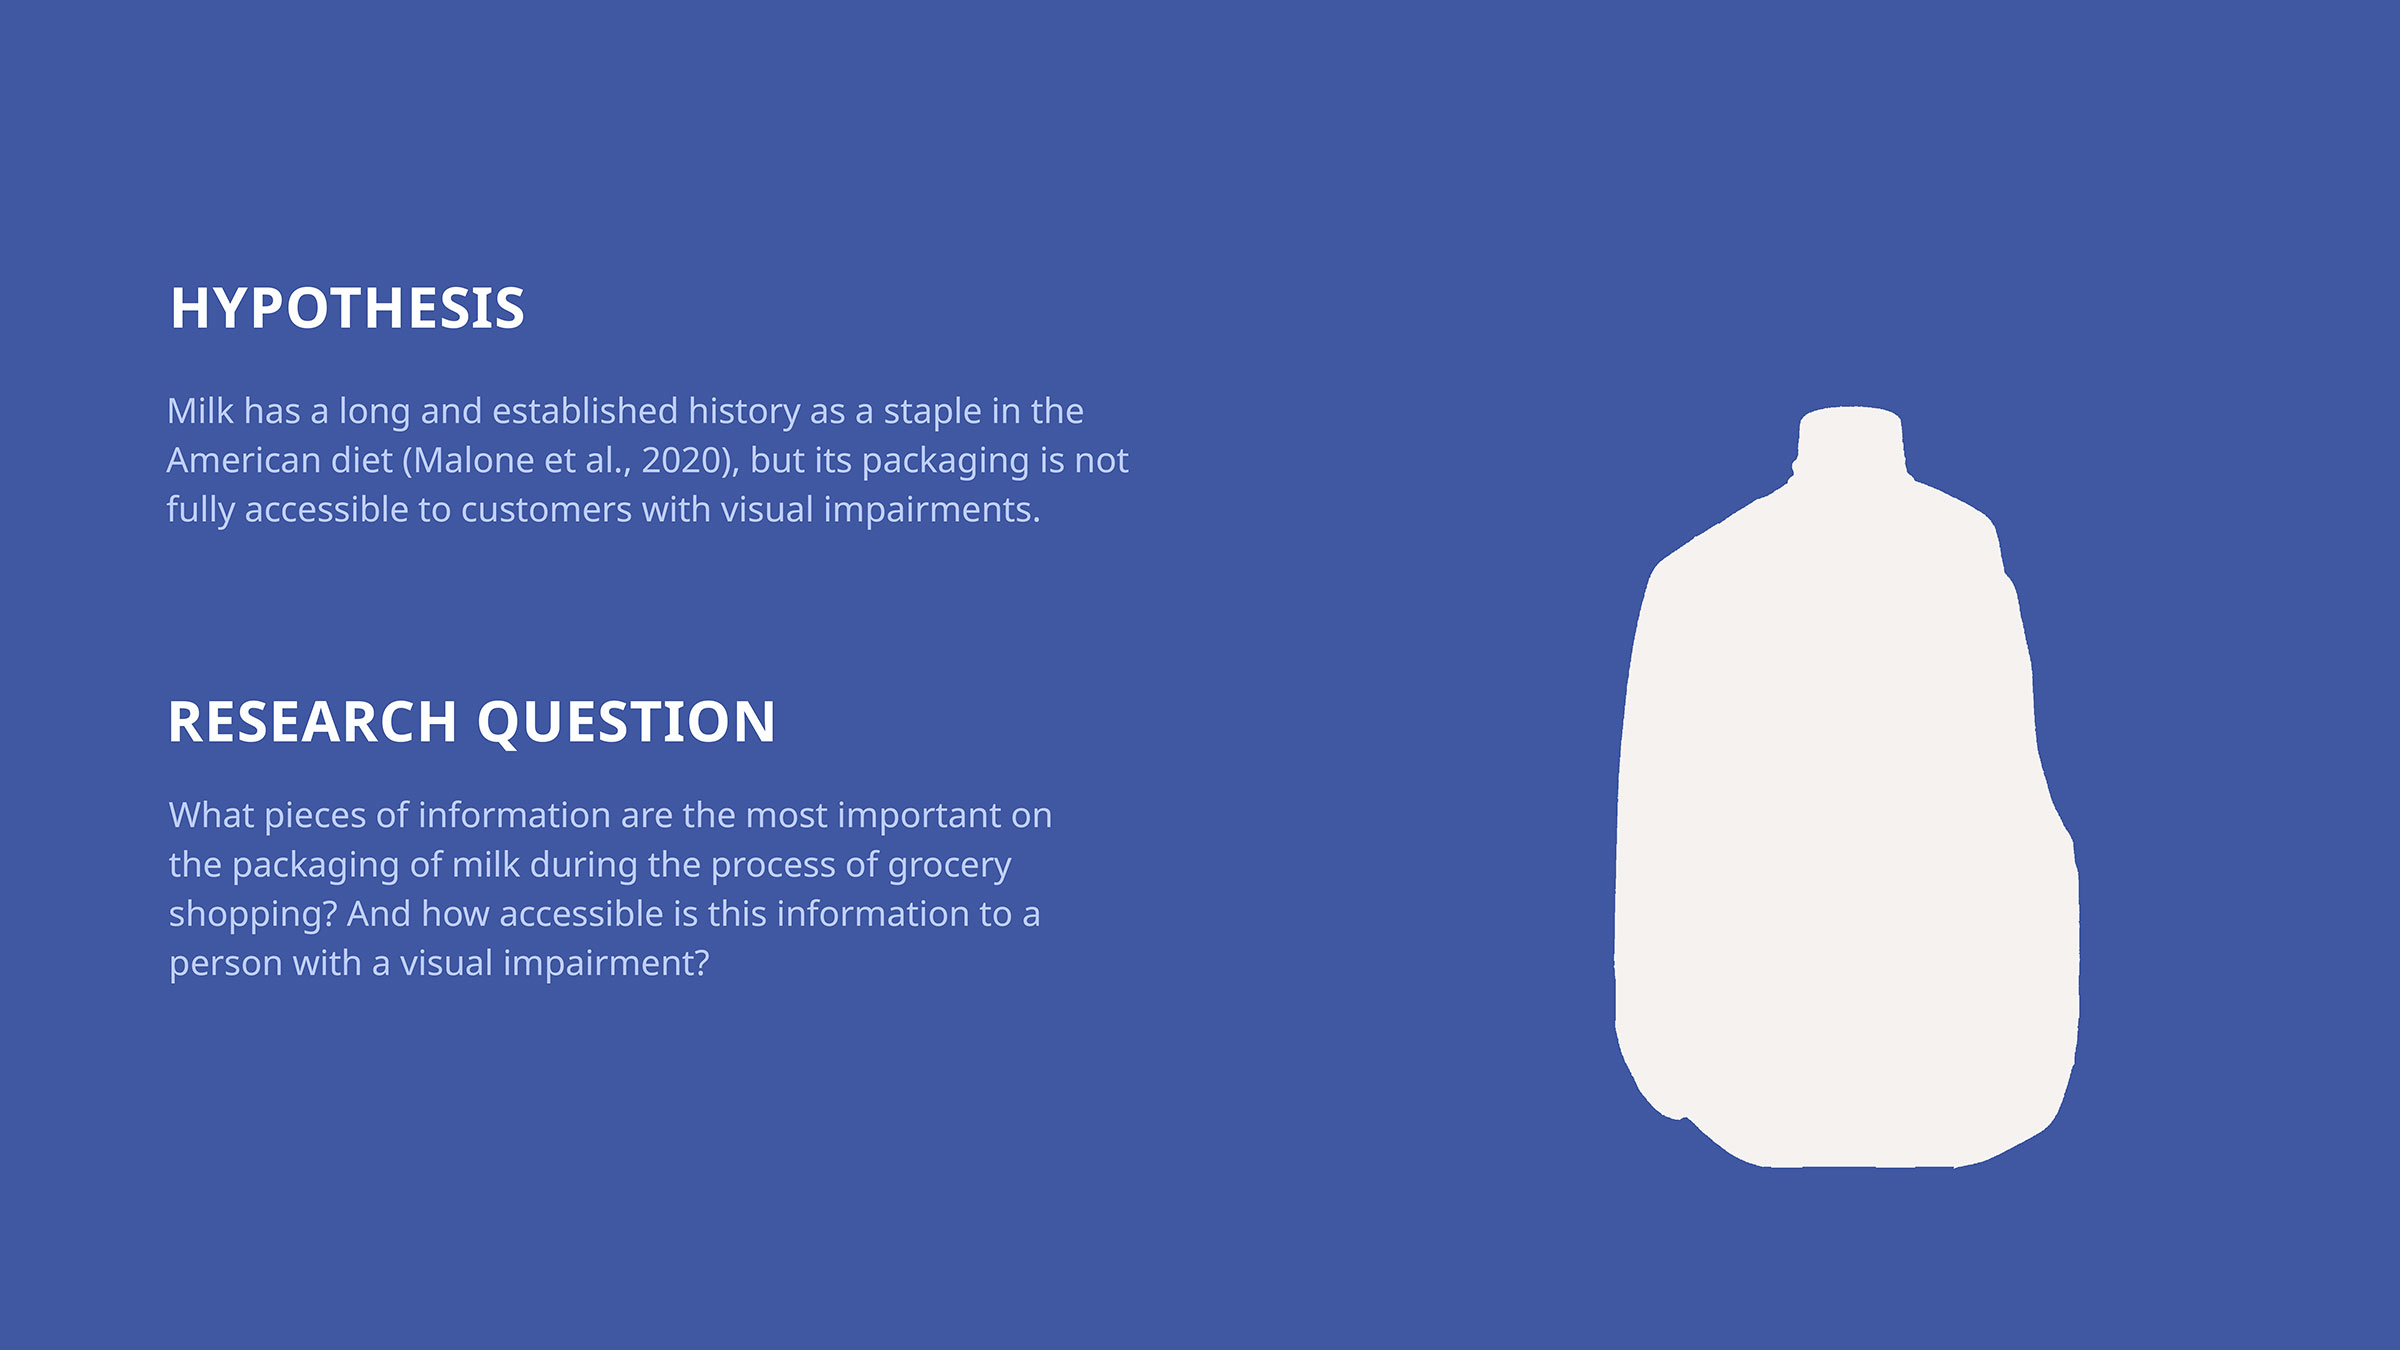 Hypothesis: Milk packaging is not fully accessible to customers with visual impairments. Research question: What information is the most important on the packaging of milk, and how accessible is it?